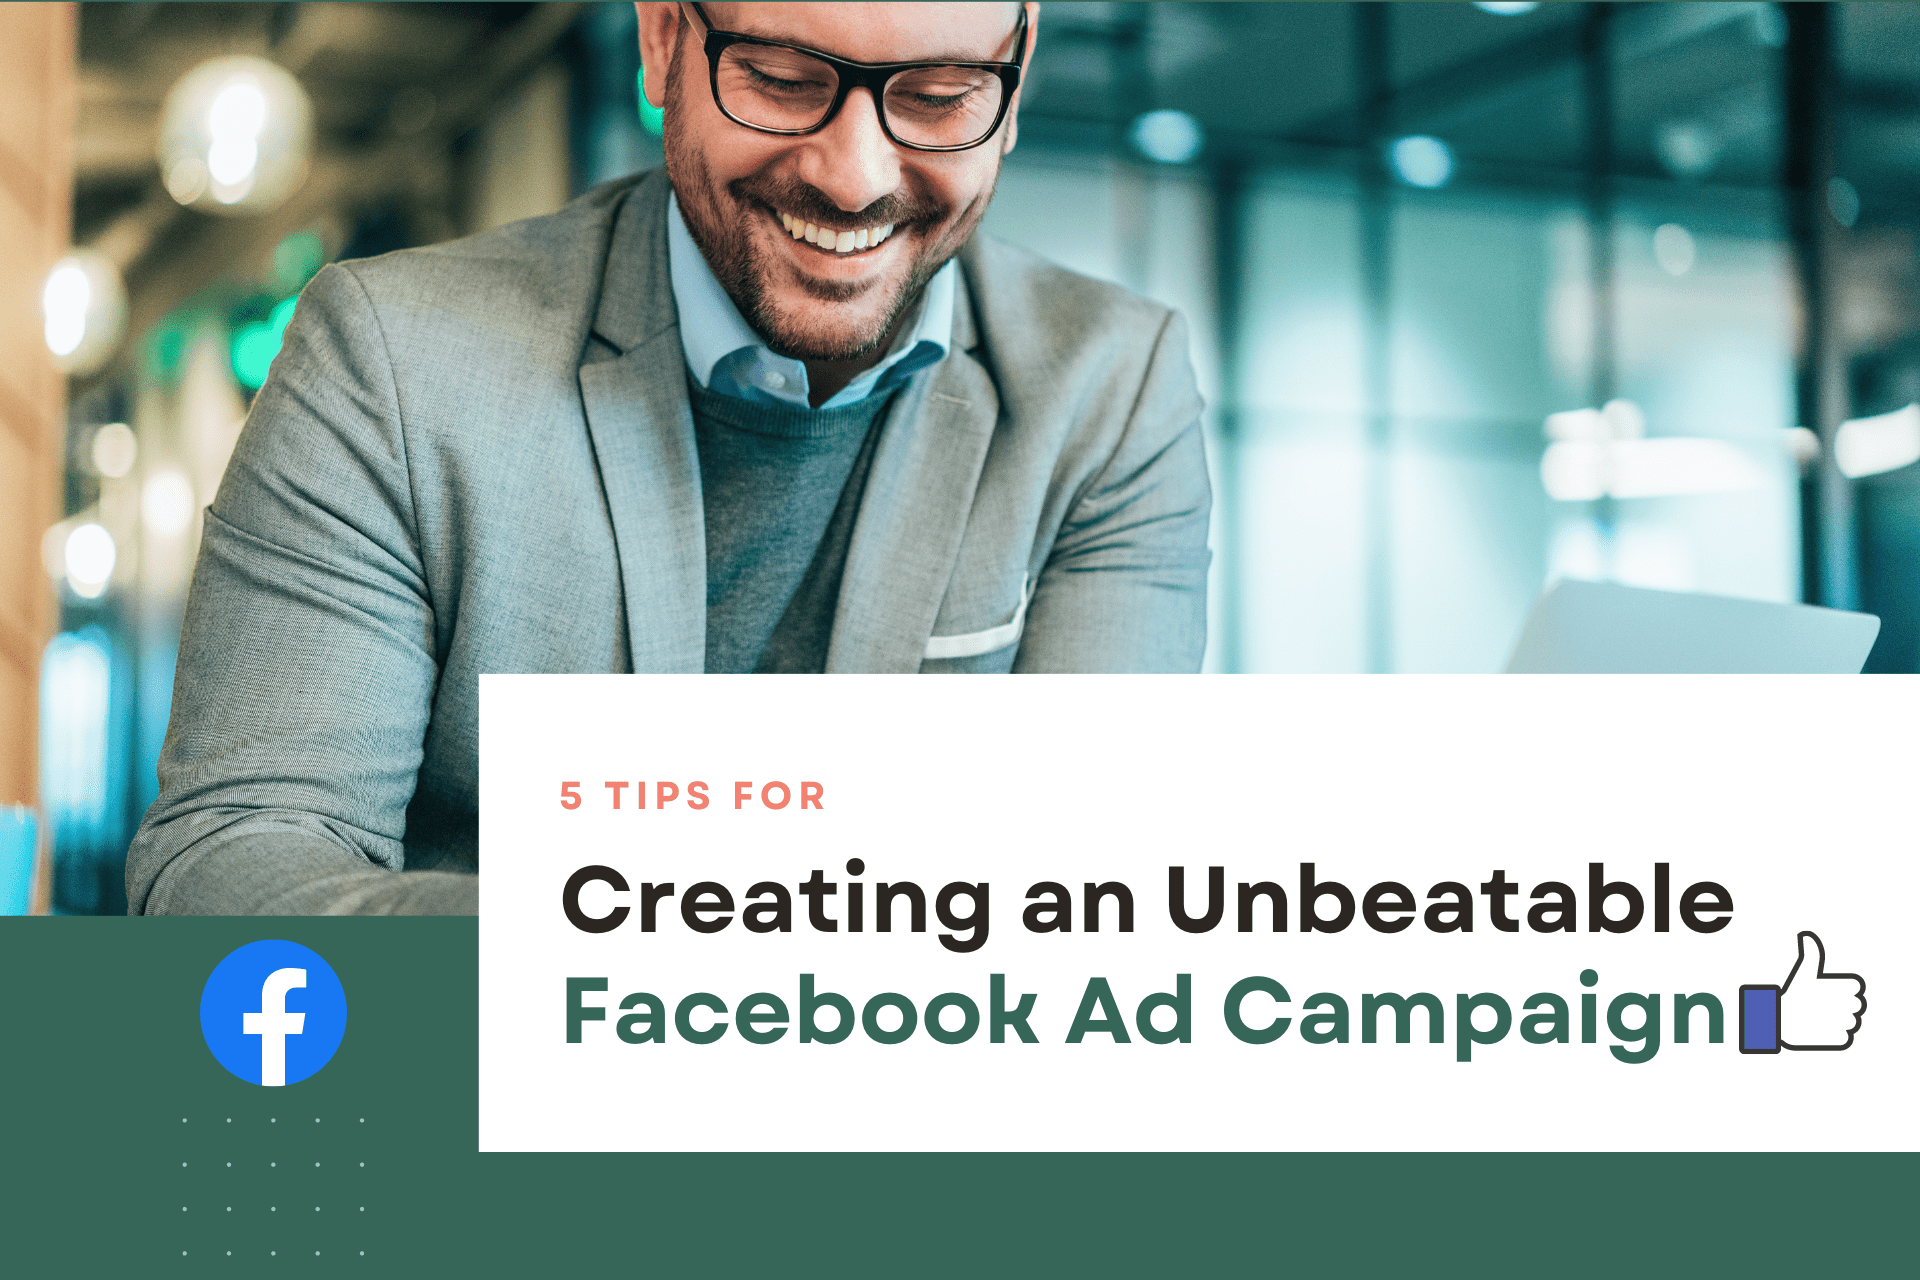 5 Tips for Creating an Unbeatable Facebook Ad Campaign